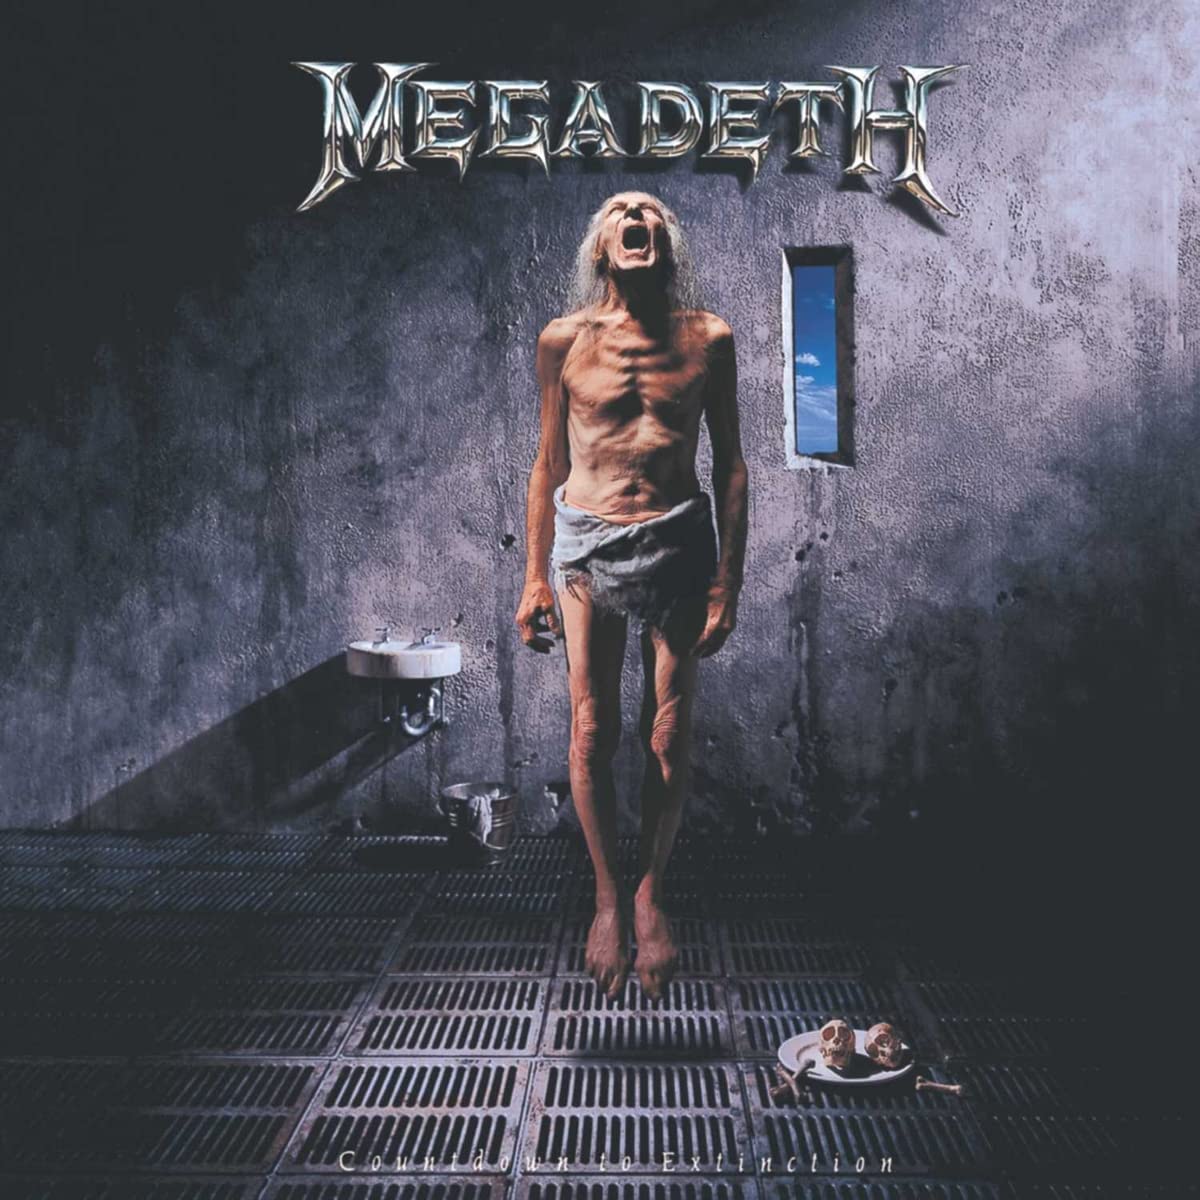 One of the best.  Countdown to extinction, Megadeth, Rock album covers